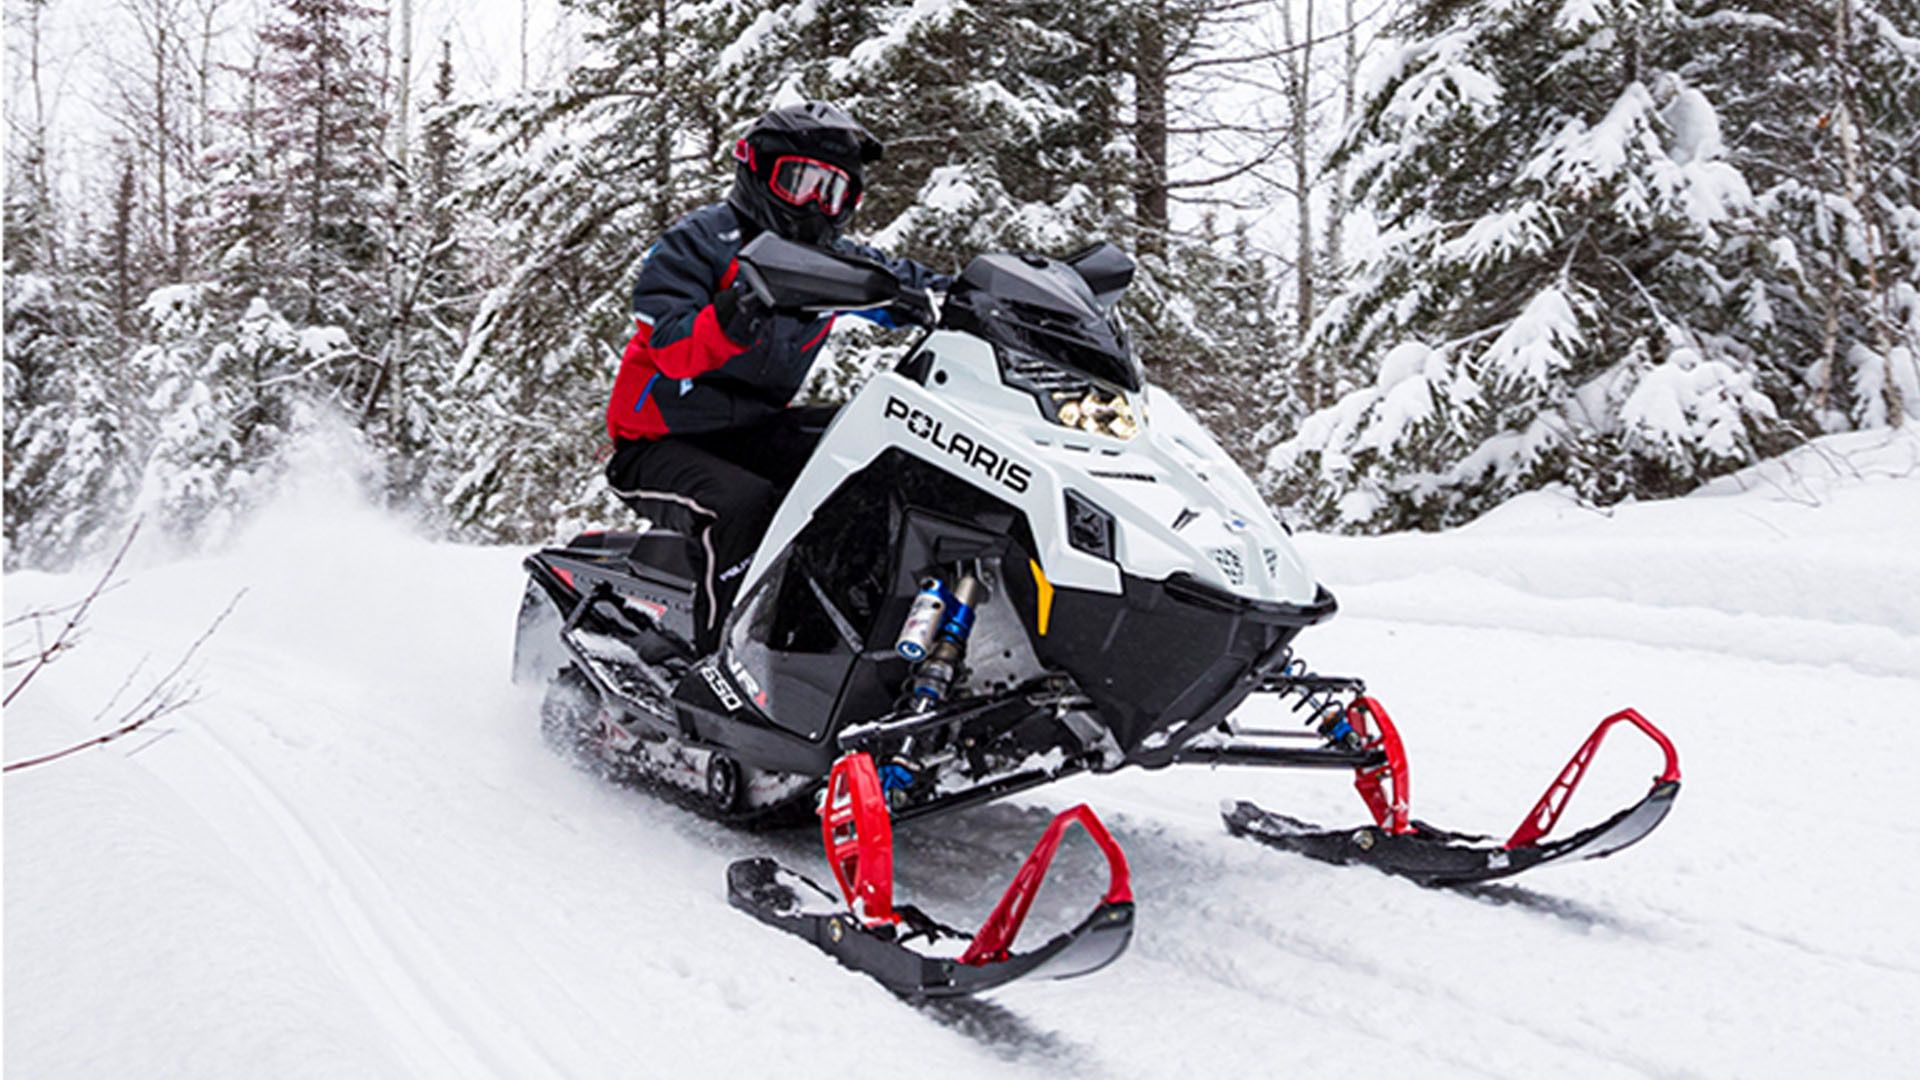 Polaris to make electric snowmobiles and offroad vehicles